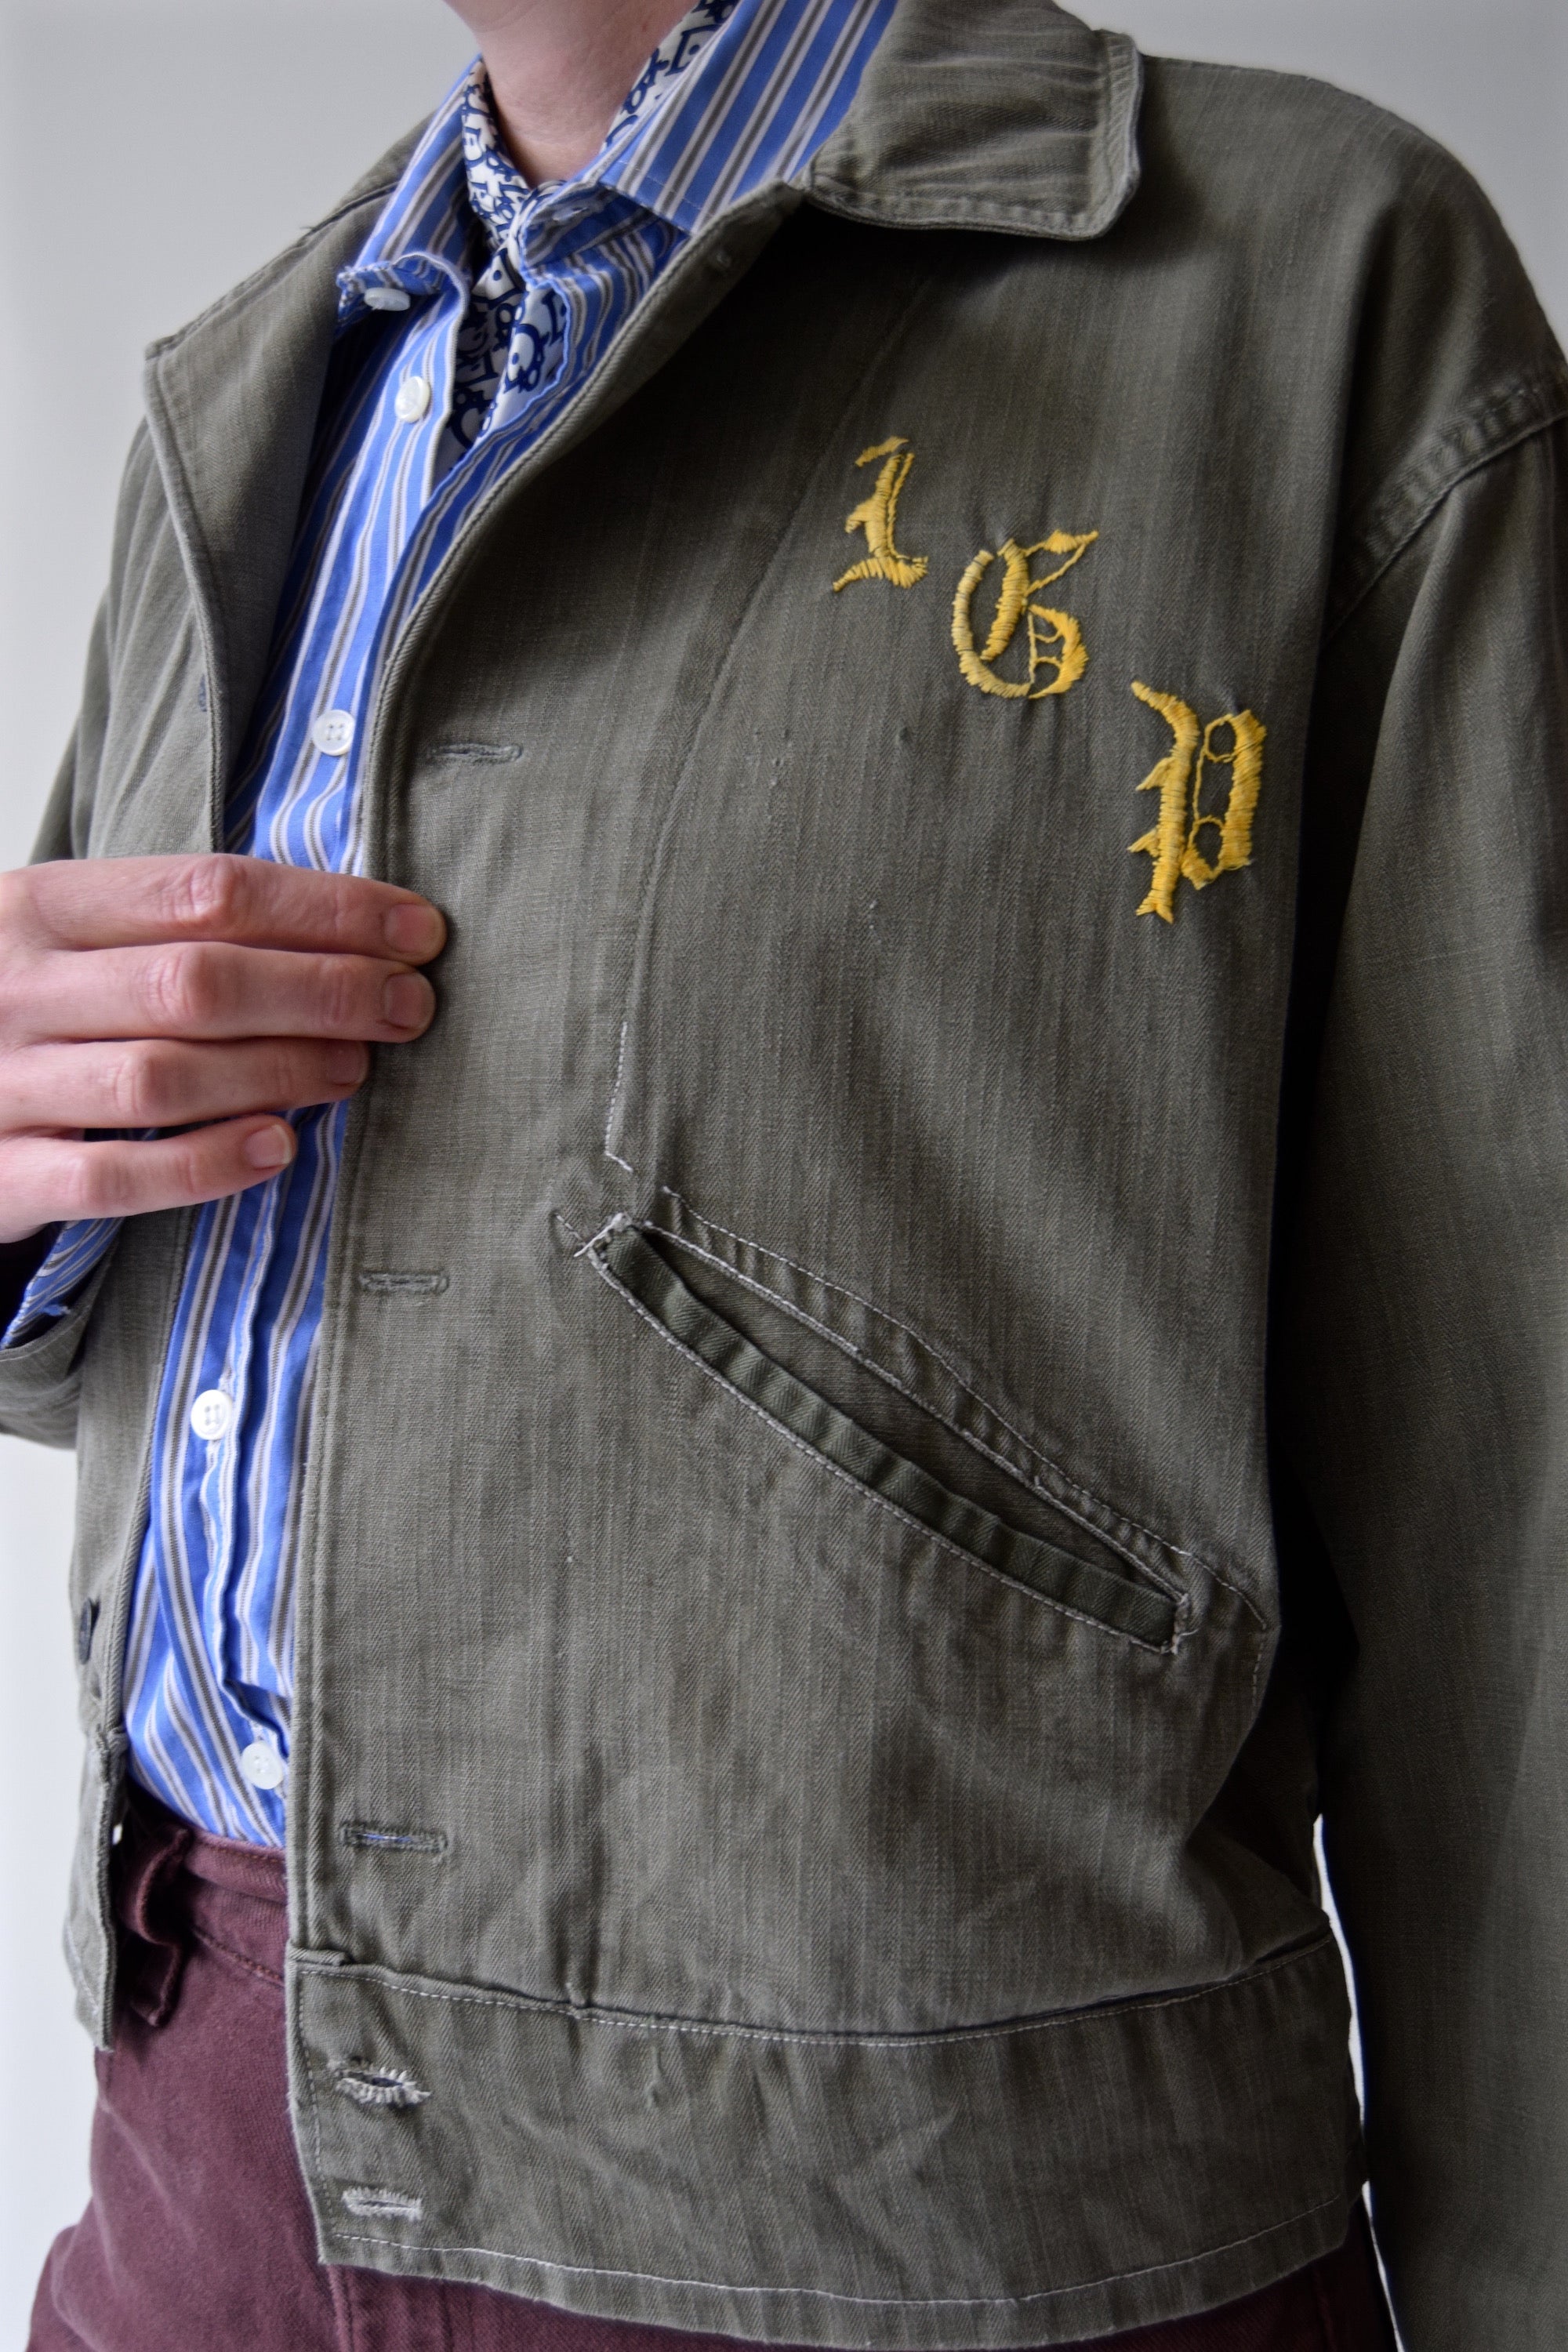 Vintage 1940's WWII HBT Jacket with LGP Embroidery